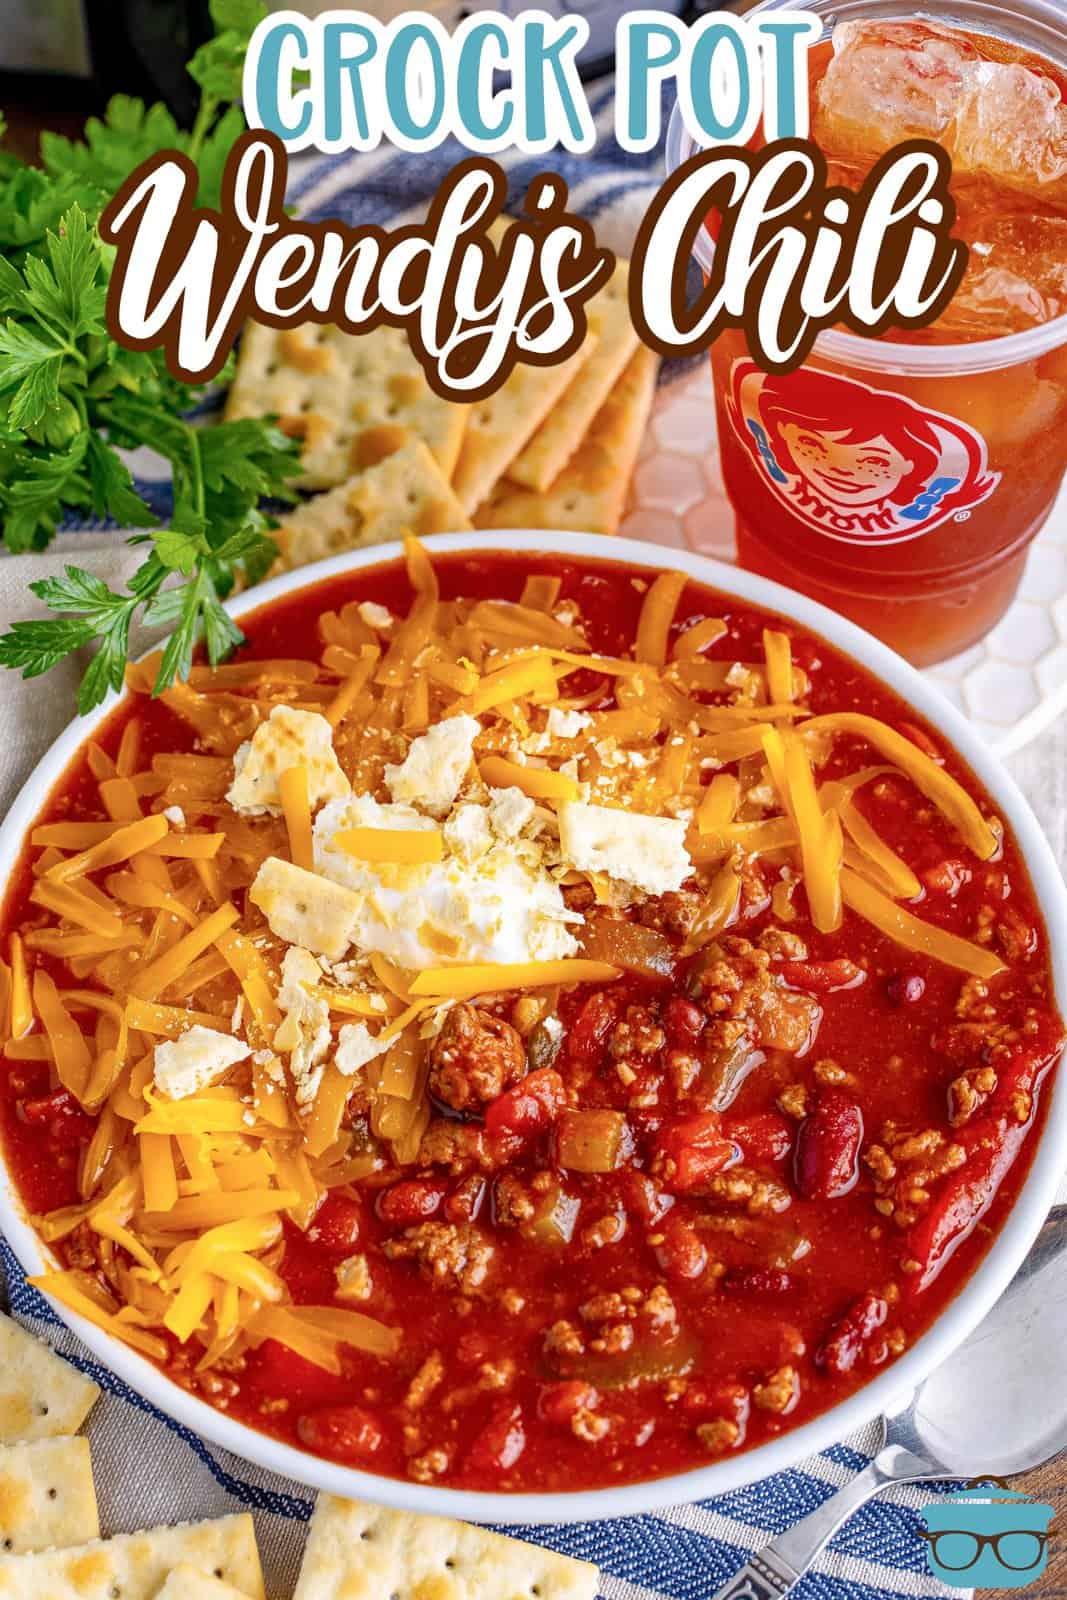 A bowl of DIY Wendy's Chili in the Slow Cooker.